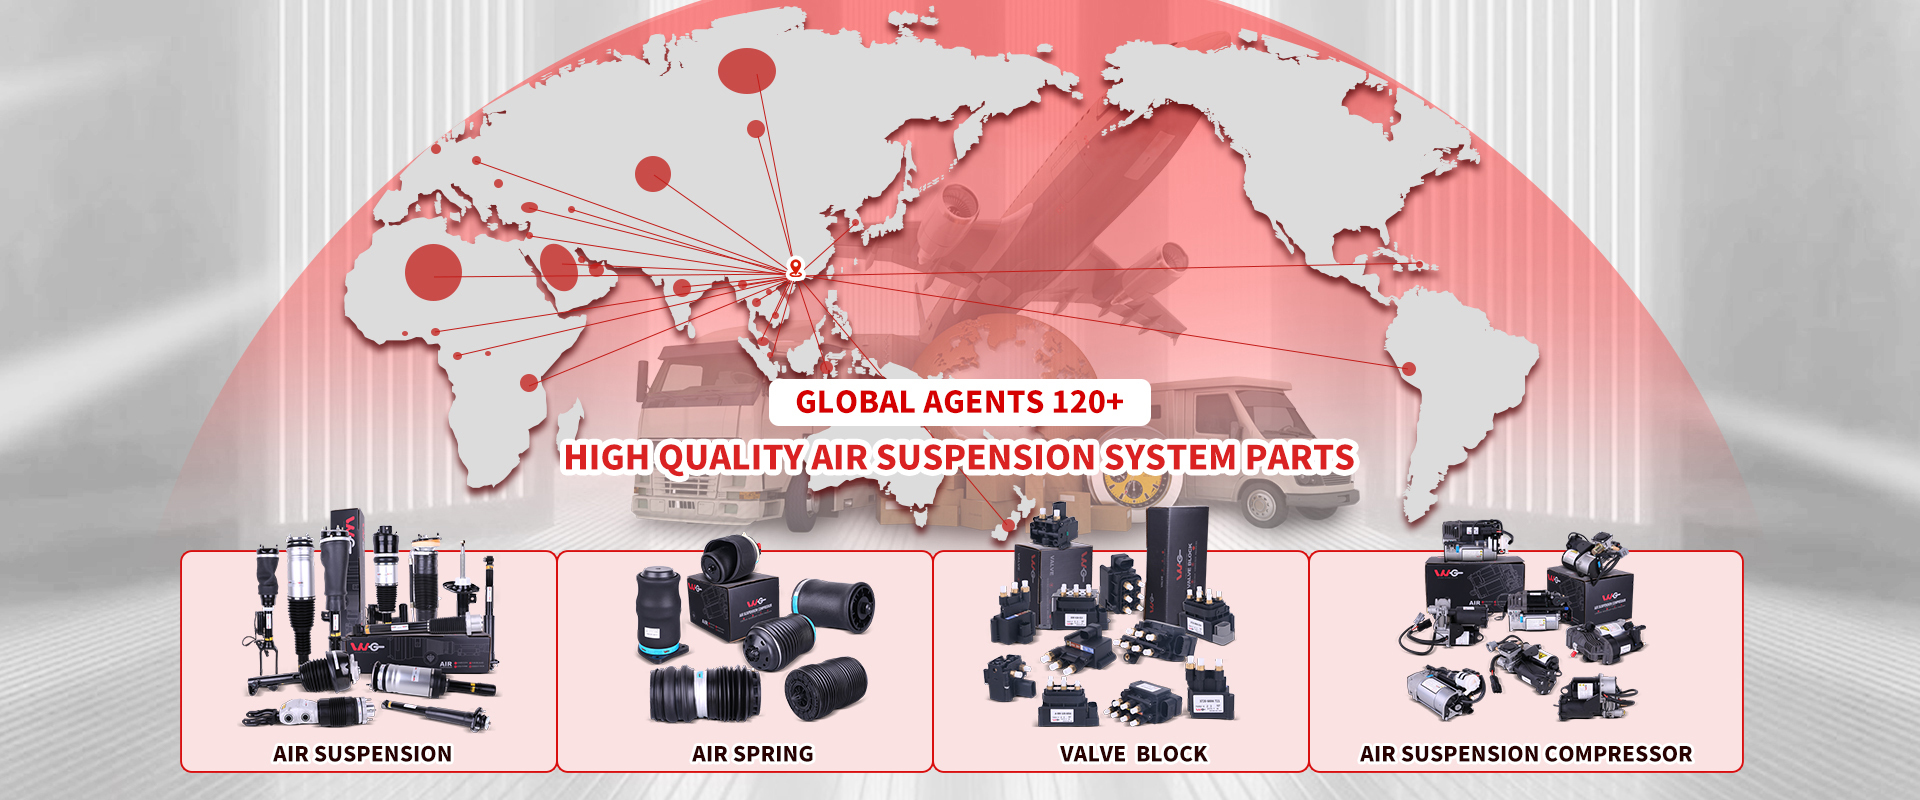 VNG High Quality Air Suspension System Parts